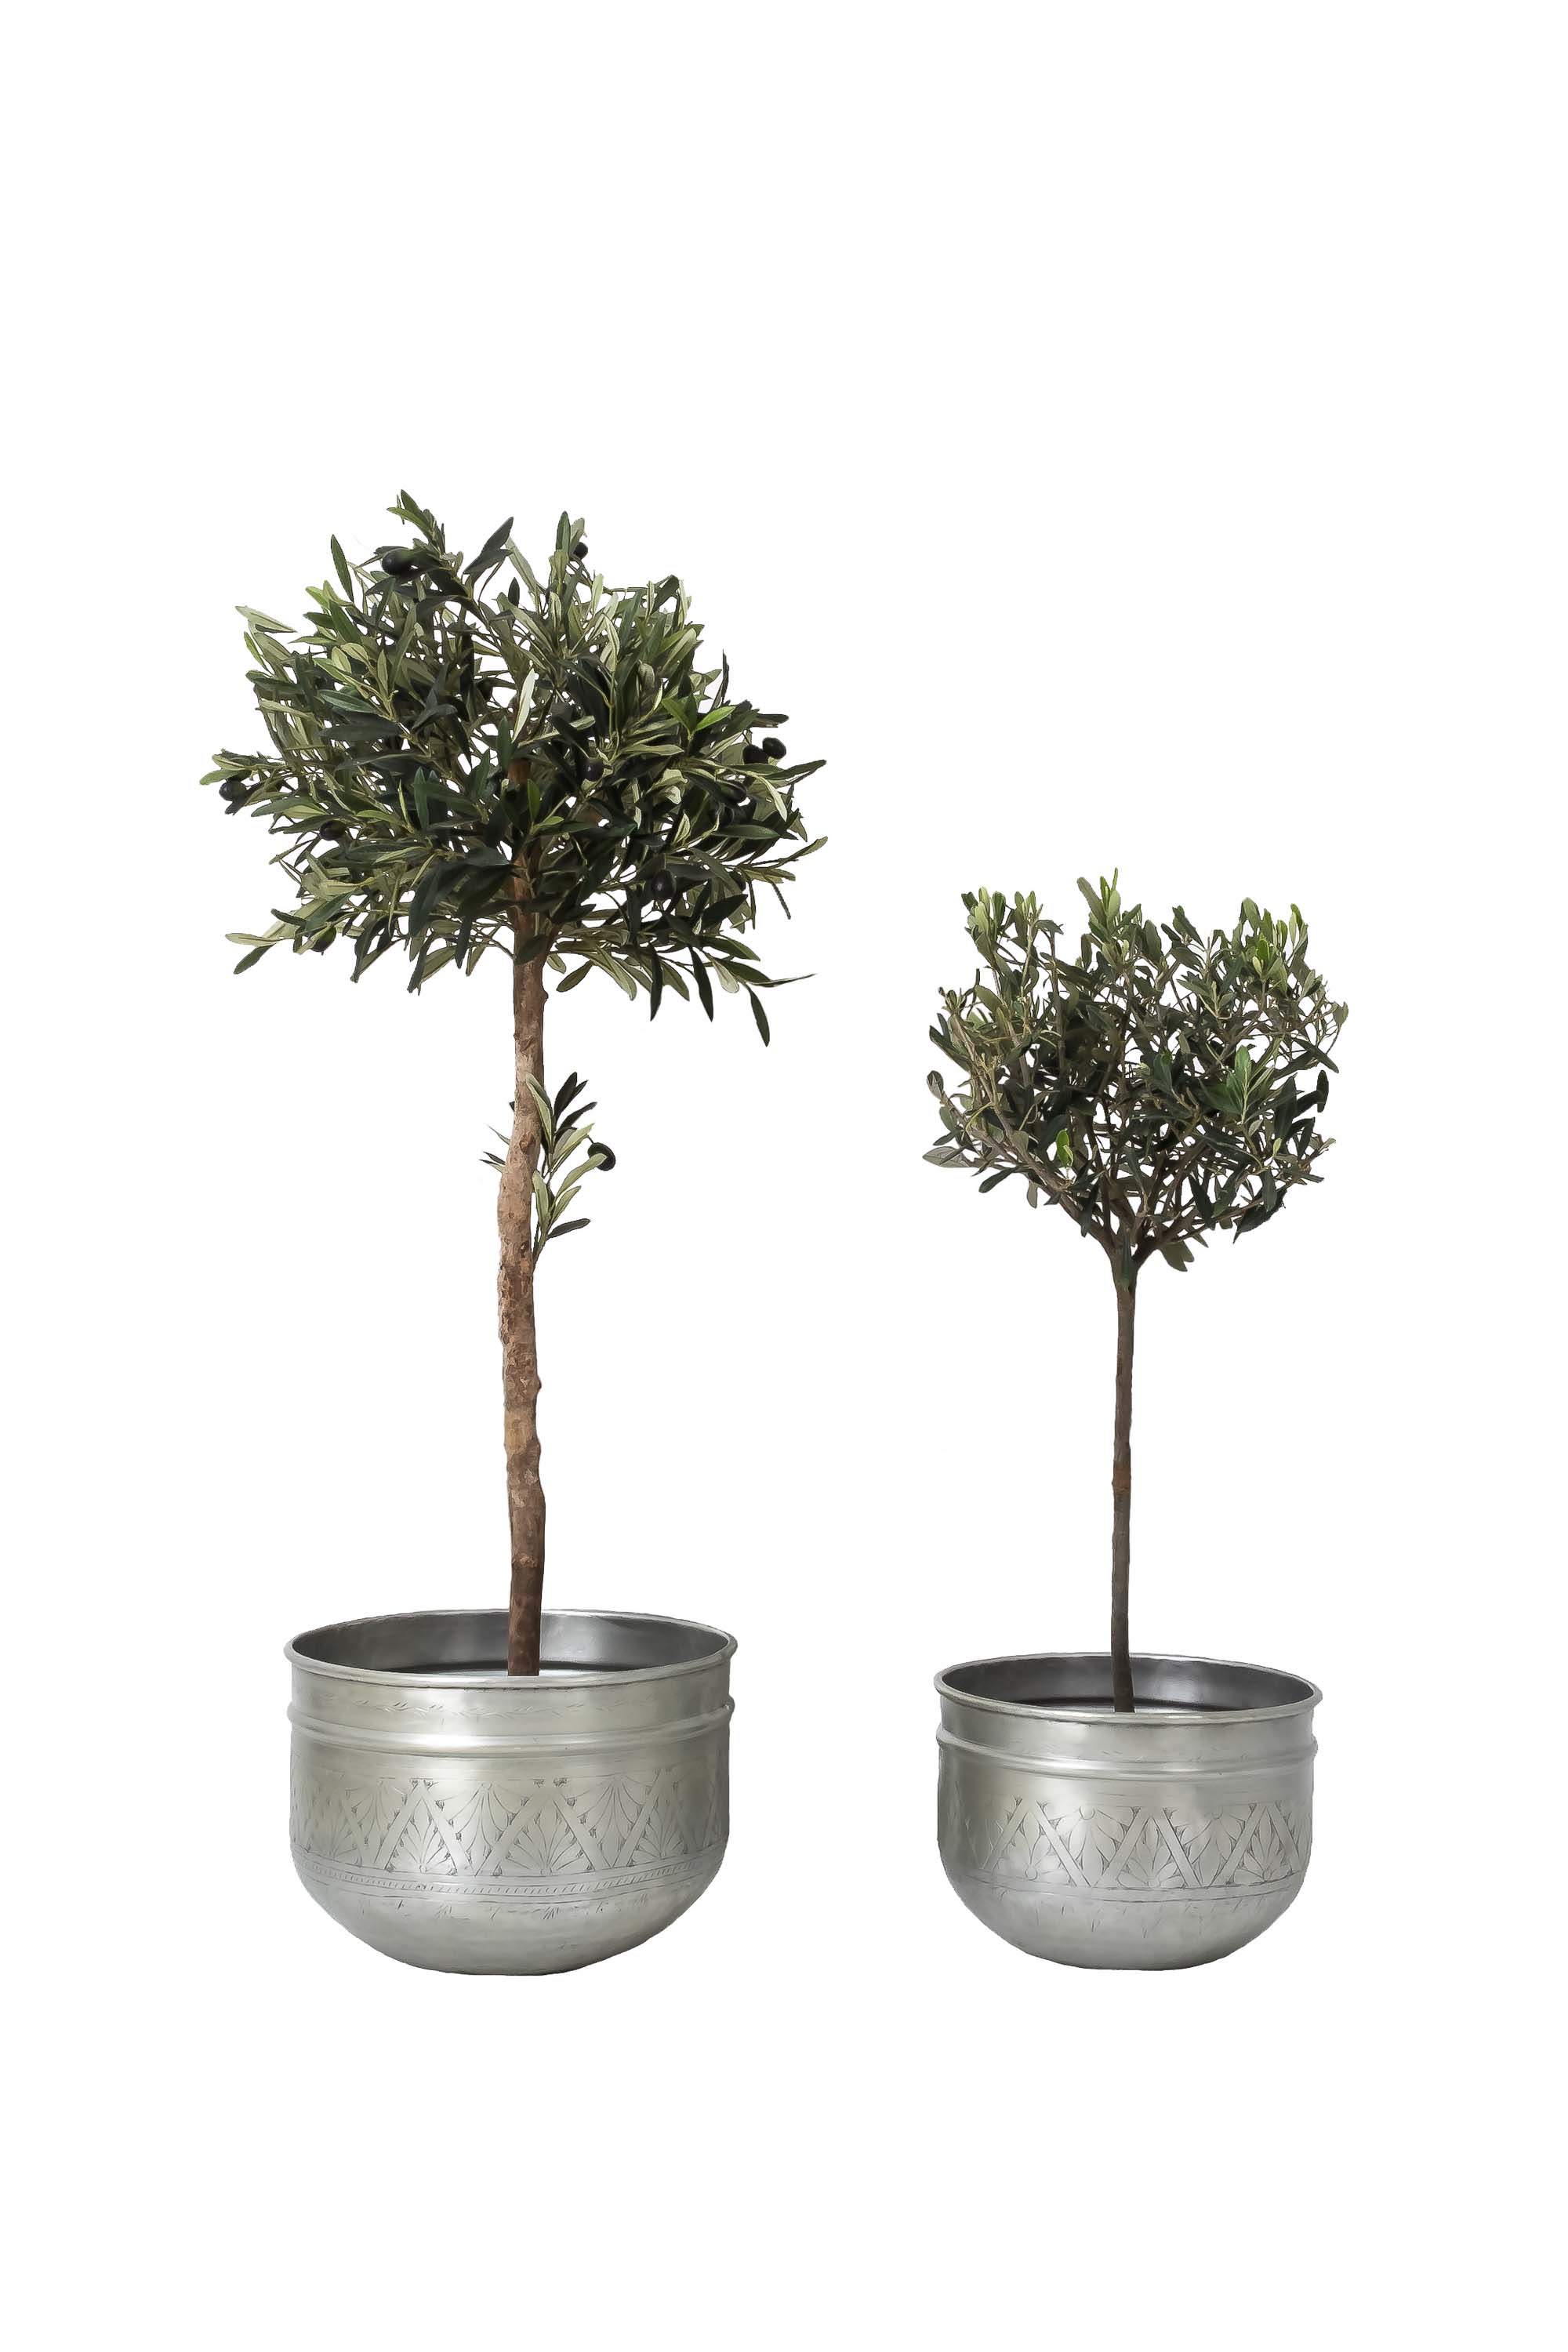 India May Home planters